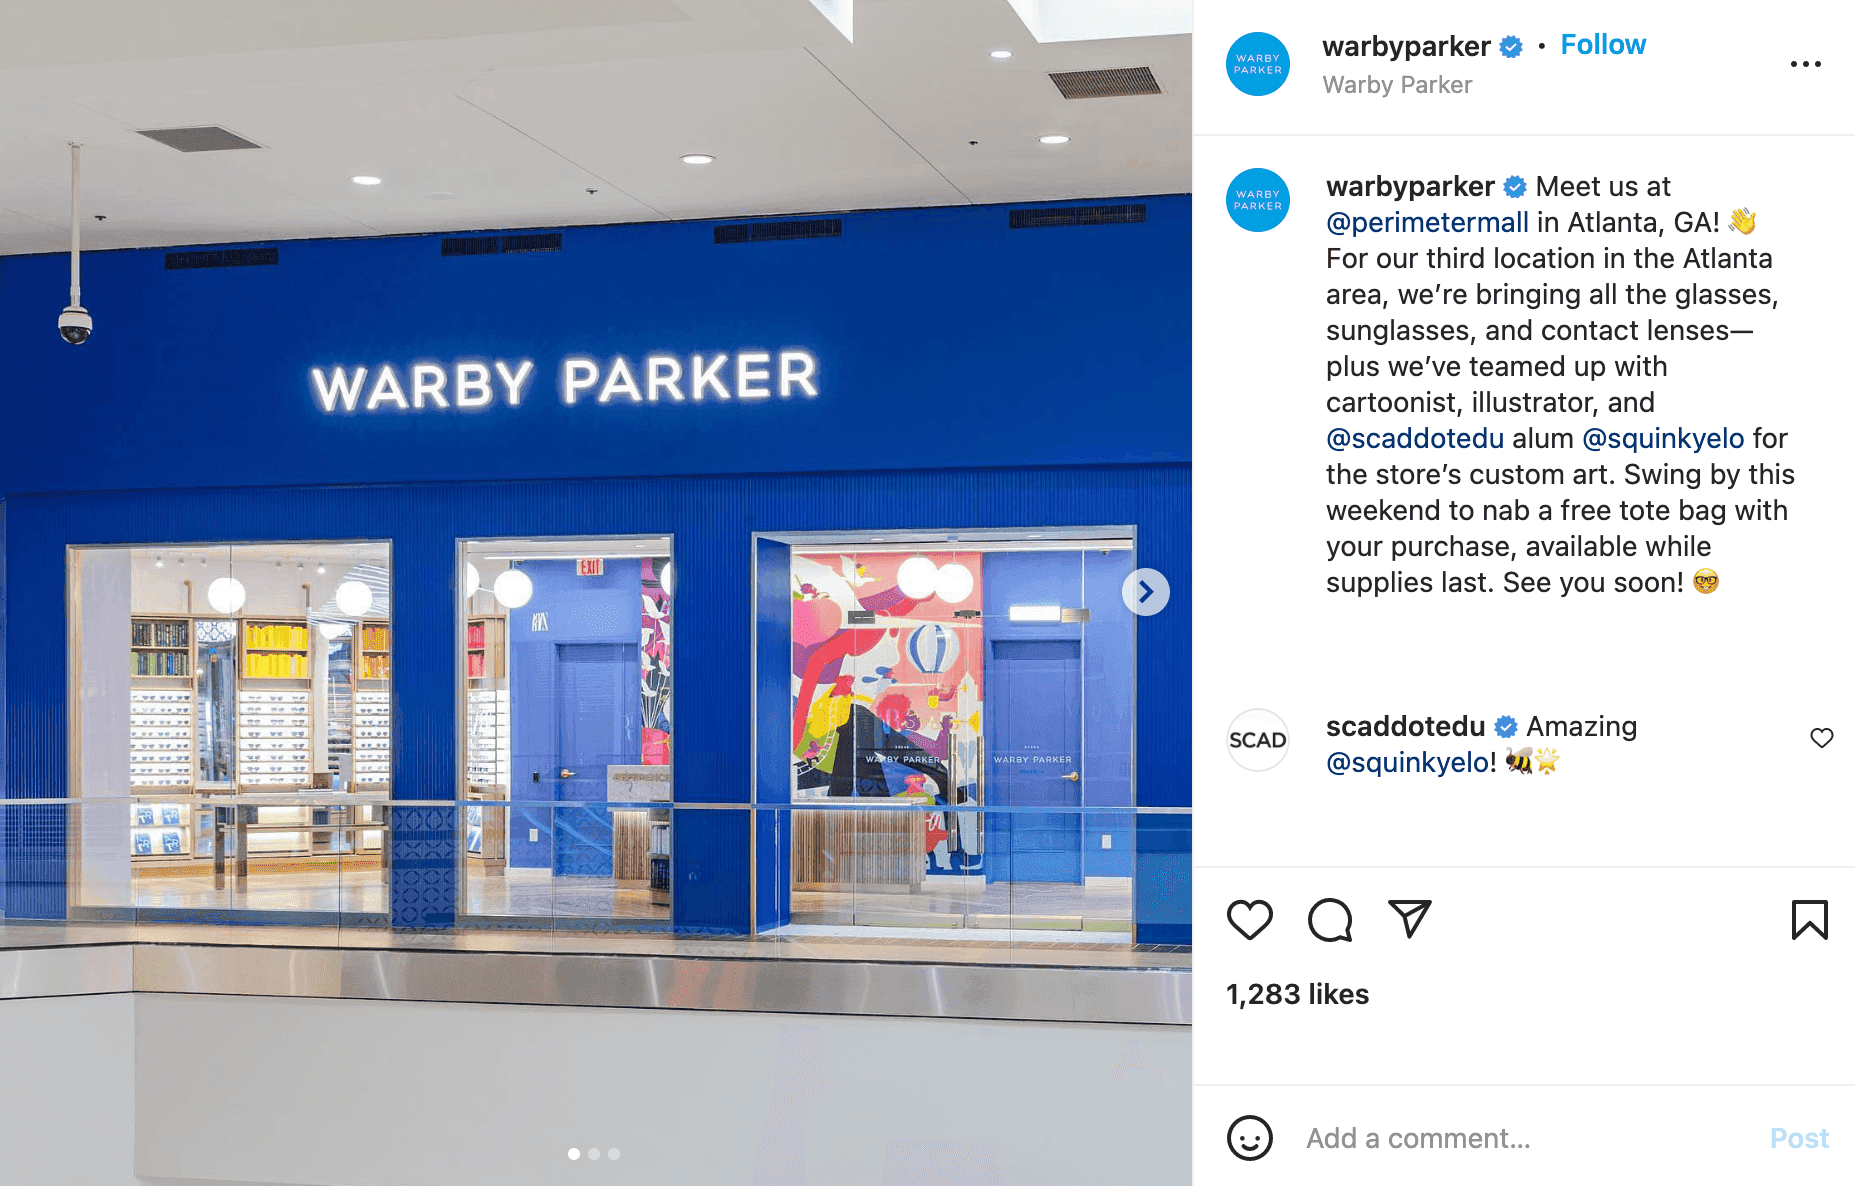 Warby Parker Instagram post about a live event they are hosting 